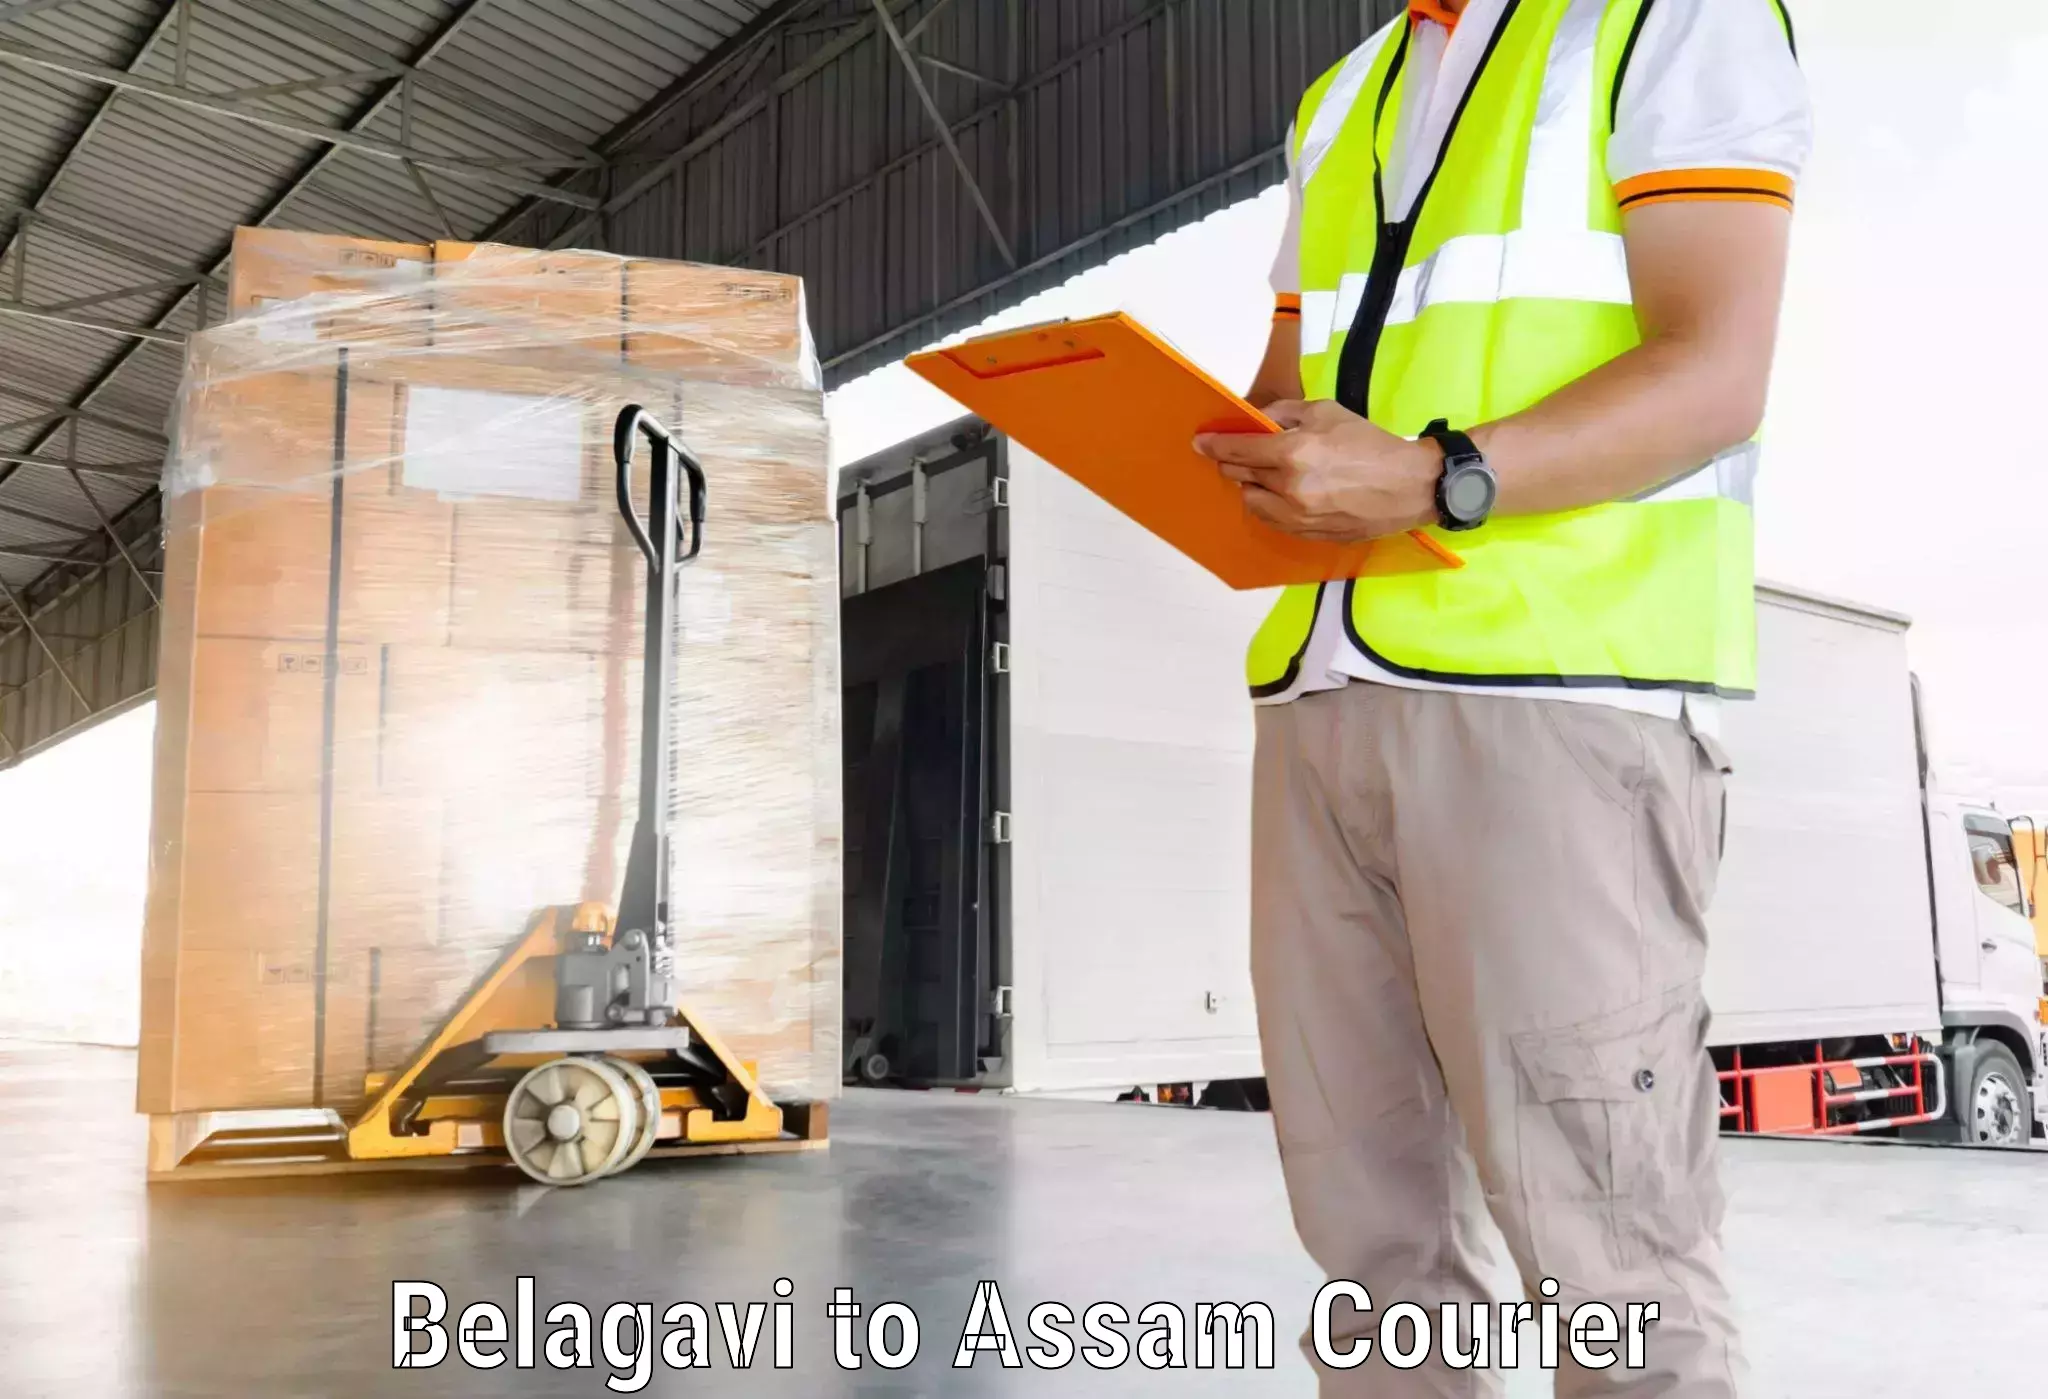 Express delivery solutions Belagavi to Guwahati